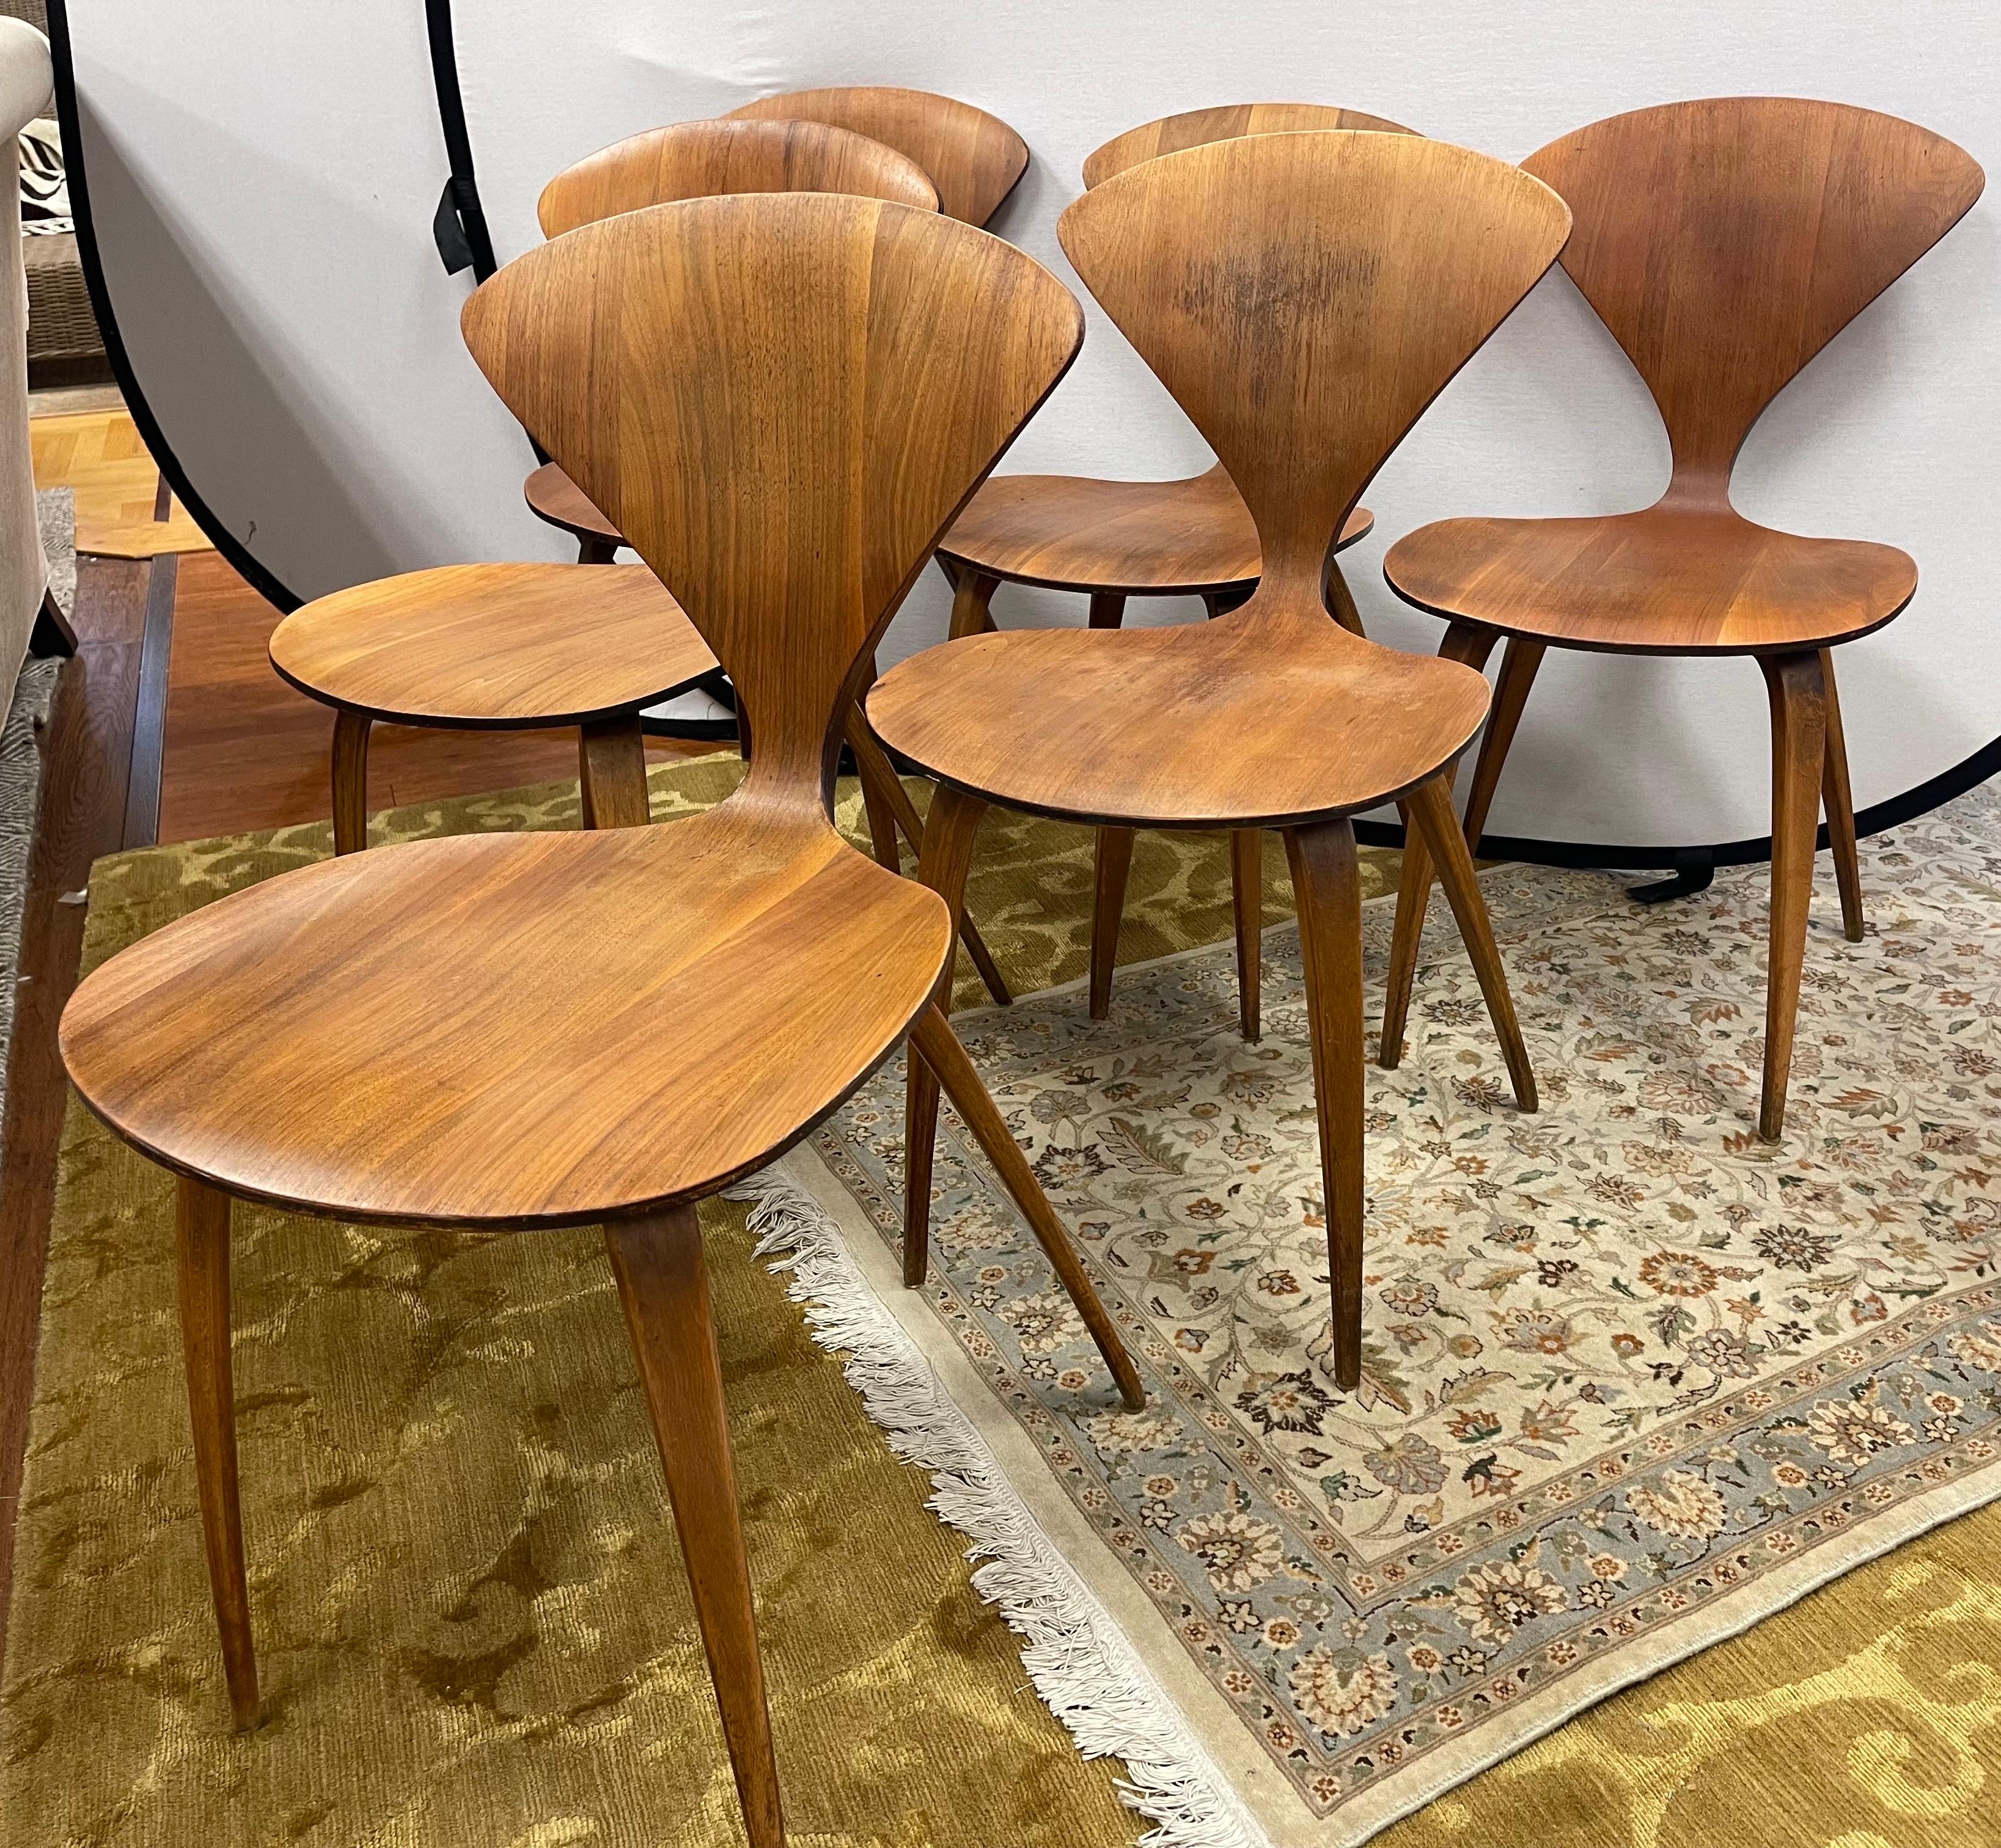 Iconic set of six matching vintage Norman Cherner chairs. Quintessential mid century modern lines and scale. Why not own the best? Please review all pics, they have age appropriate wear as shown.